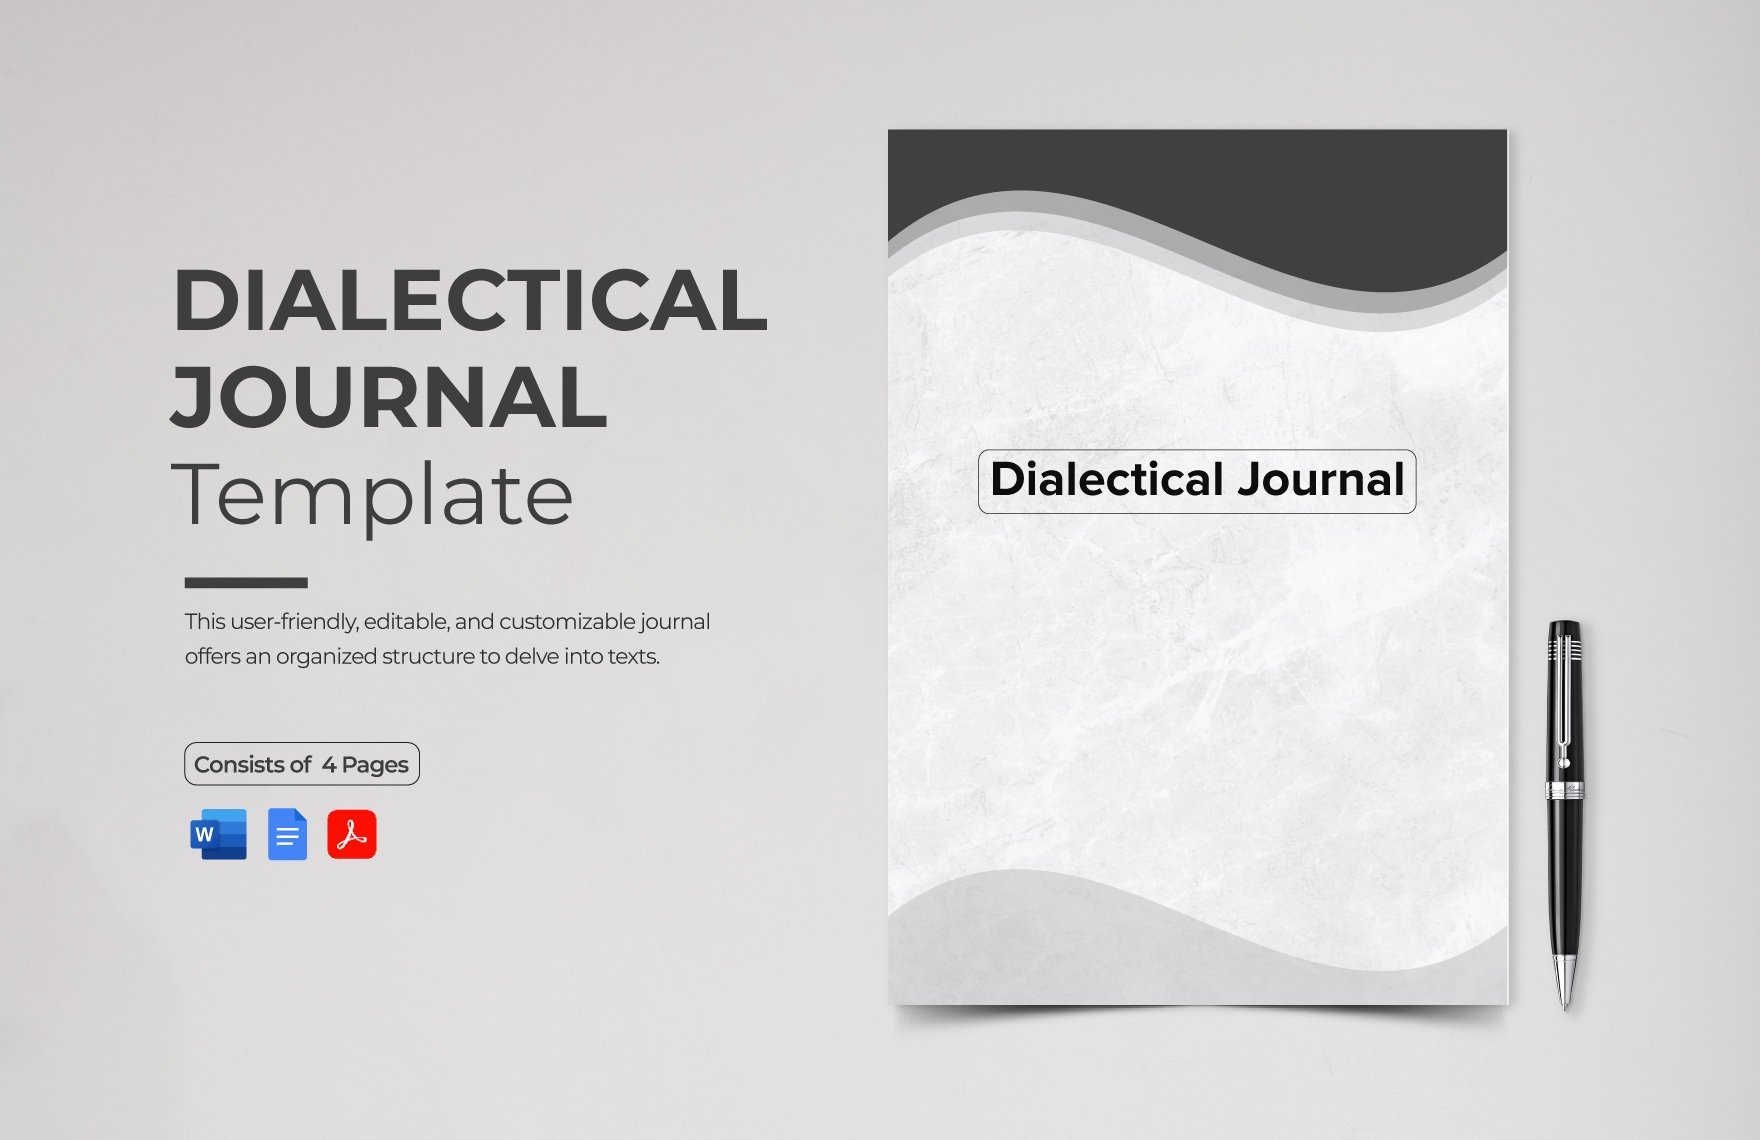 Dialectical Journal Template